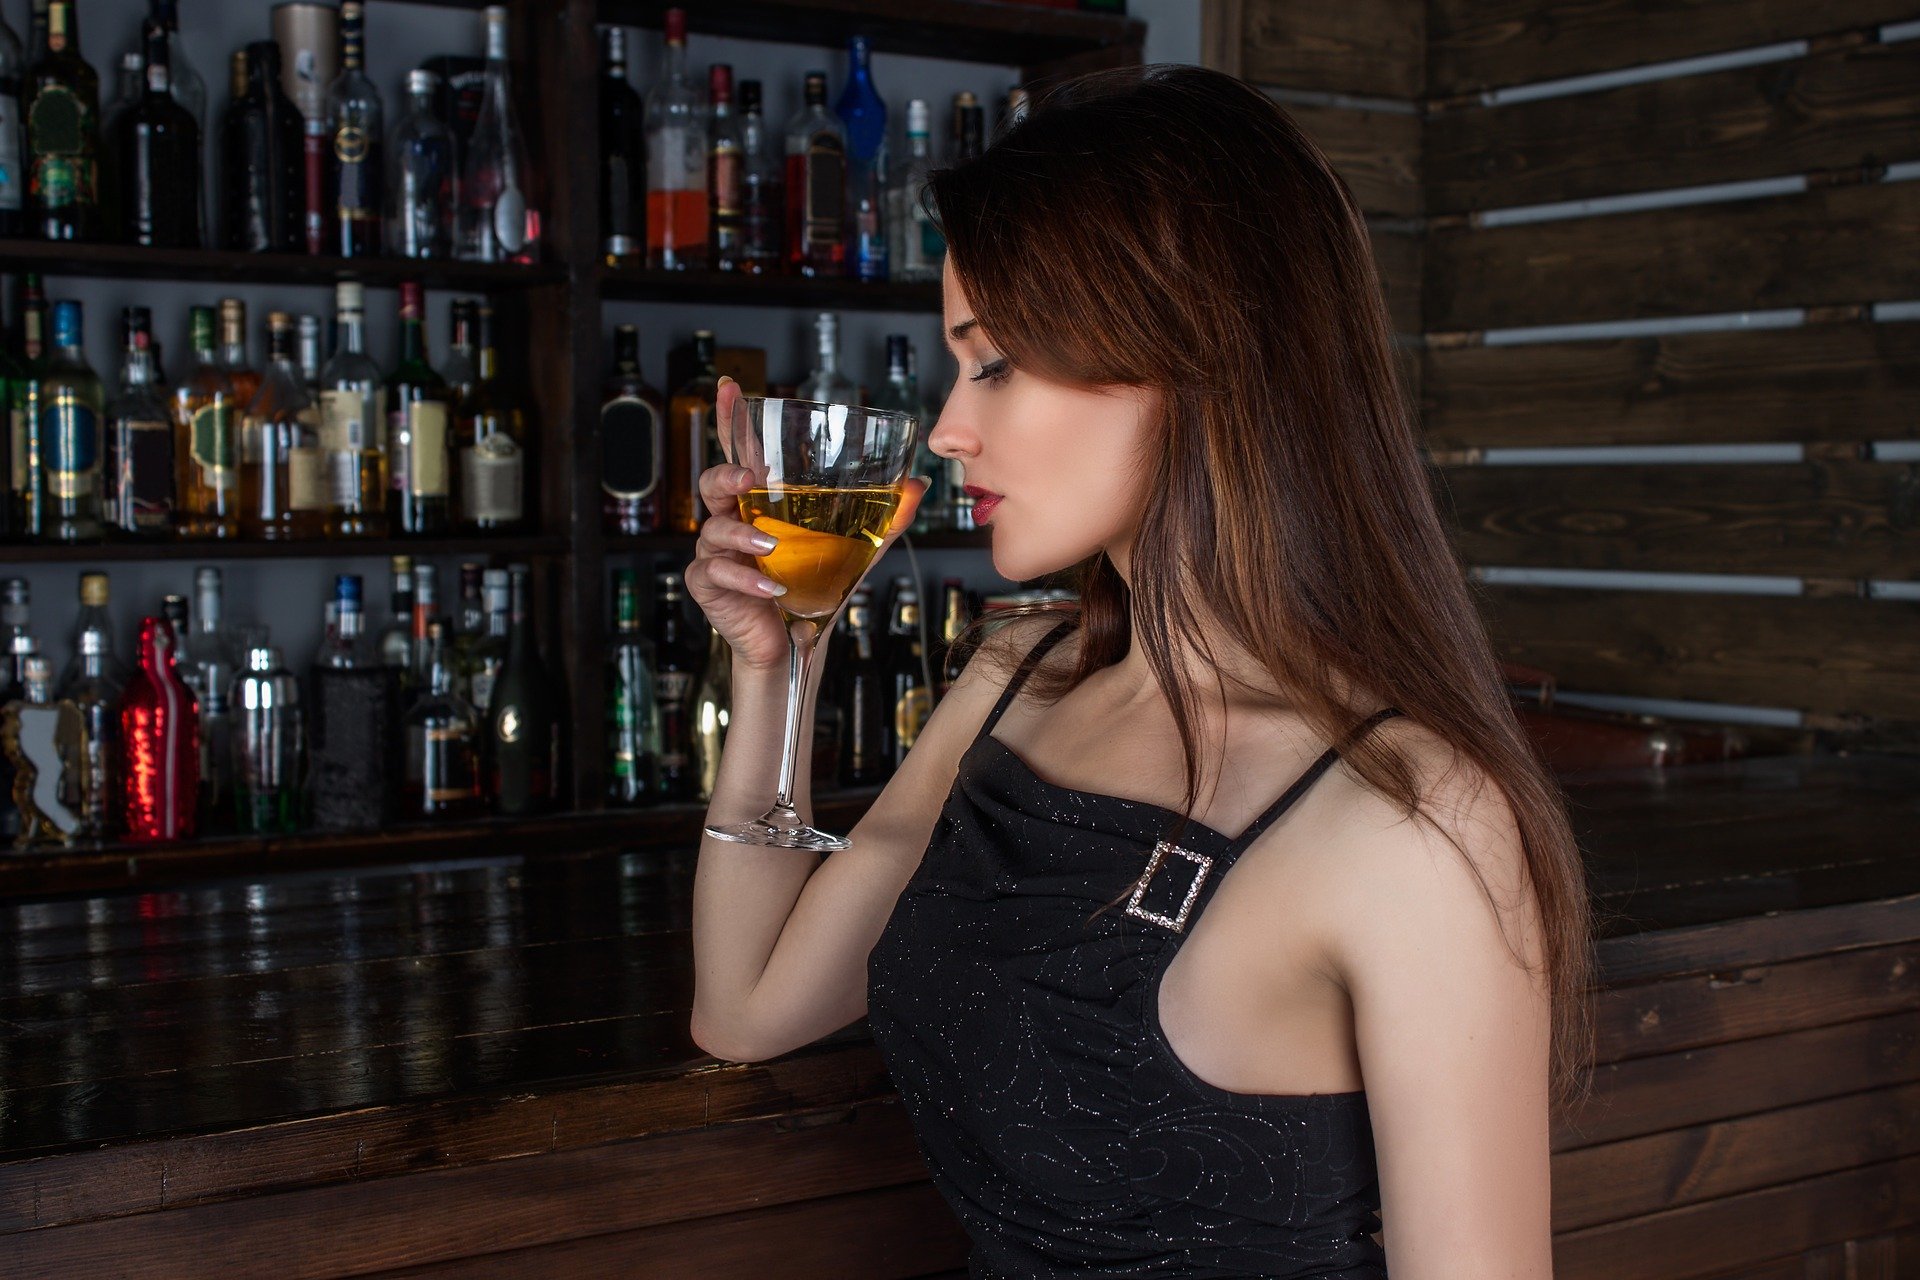 A beautiful young woman sitting alone at the bar drinking. | Photo: Pixabay.